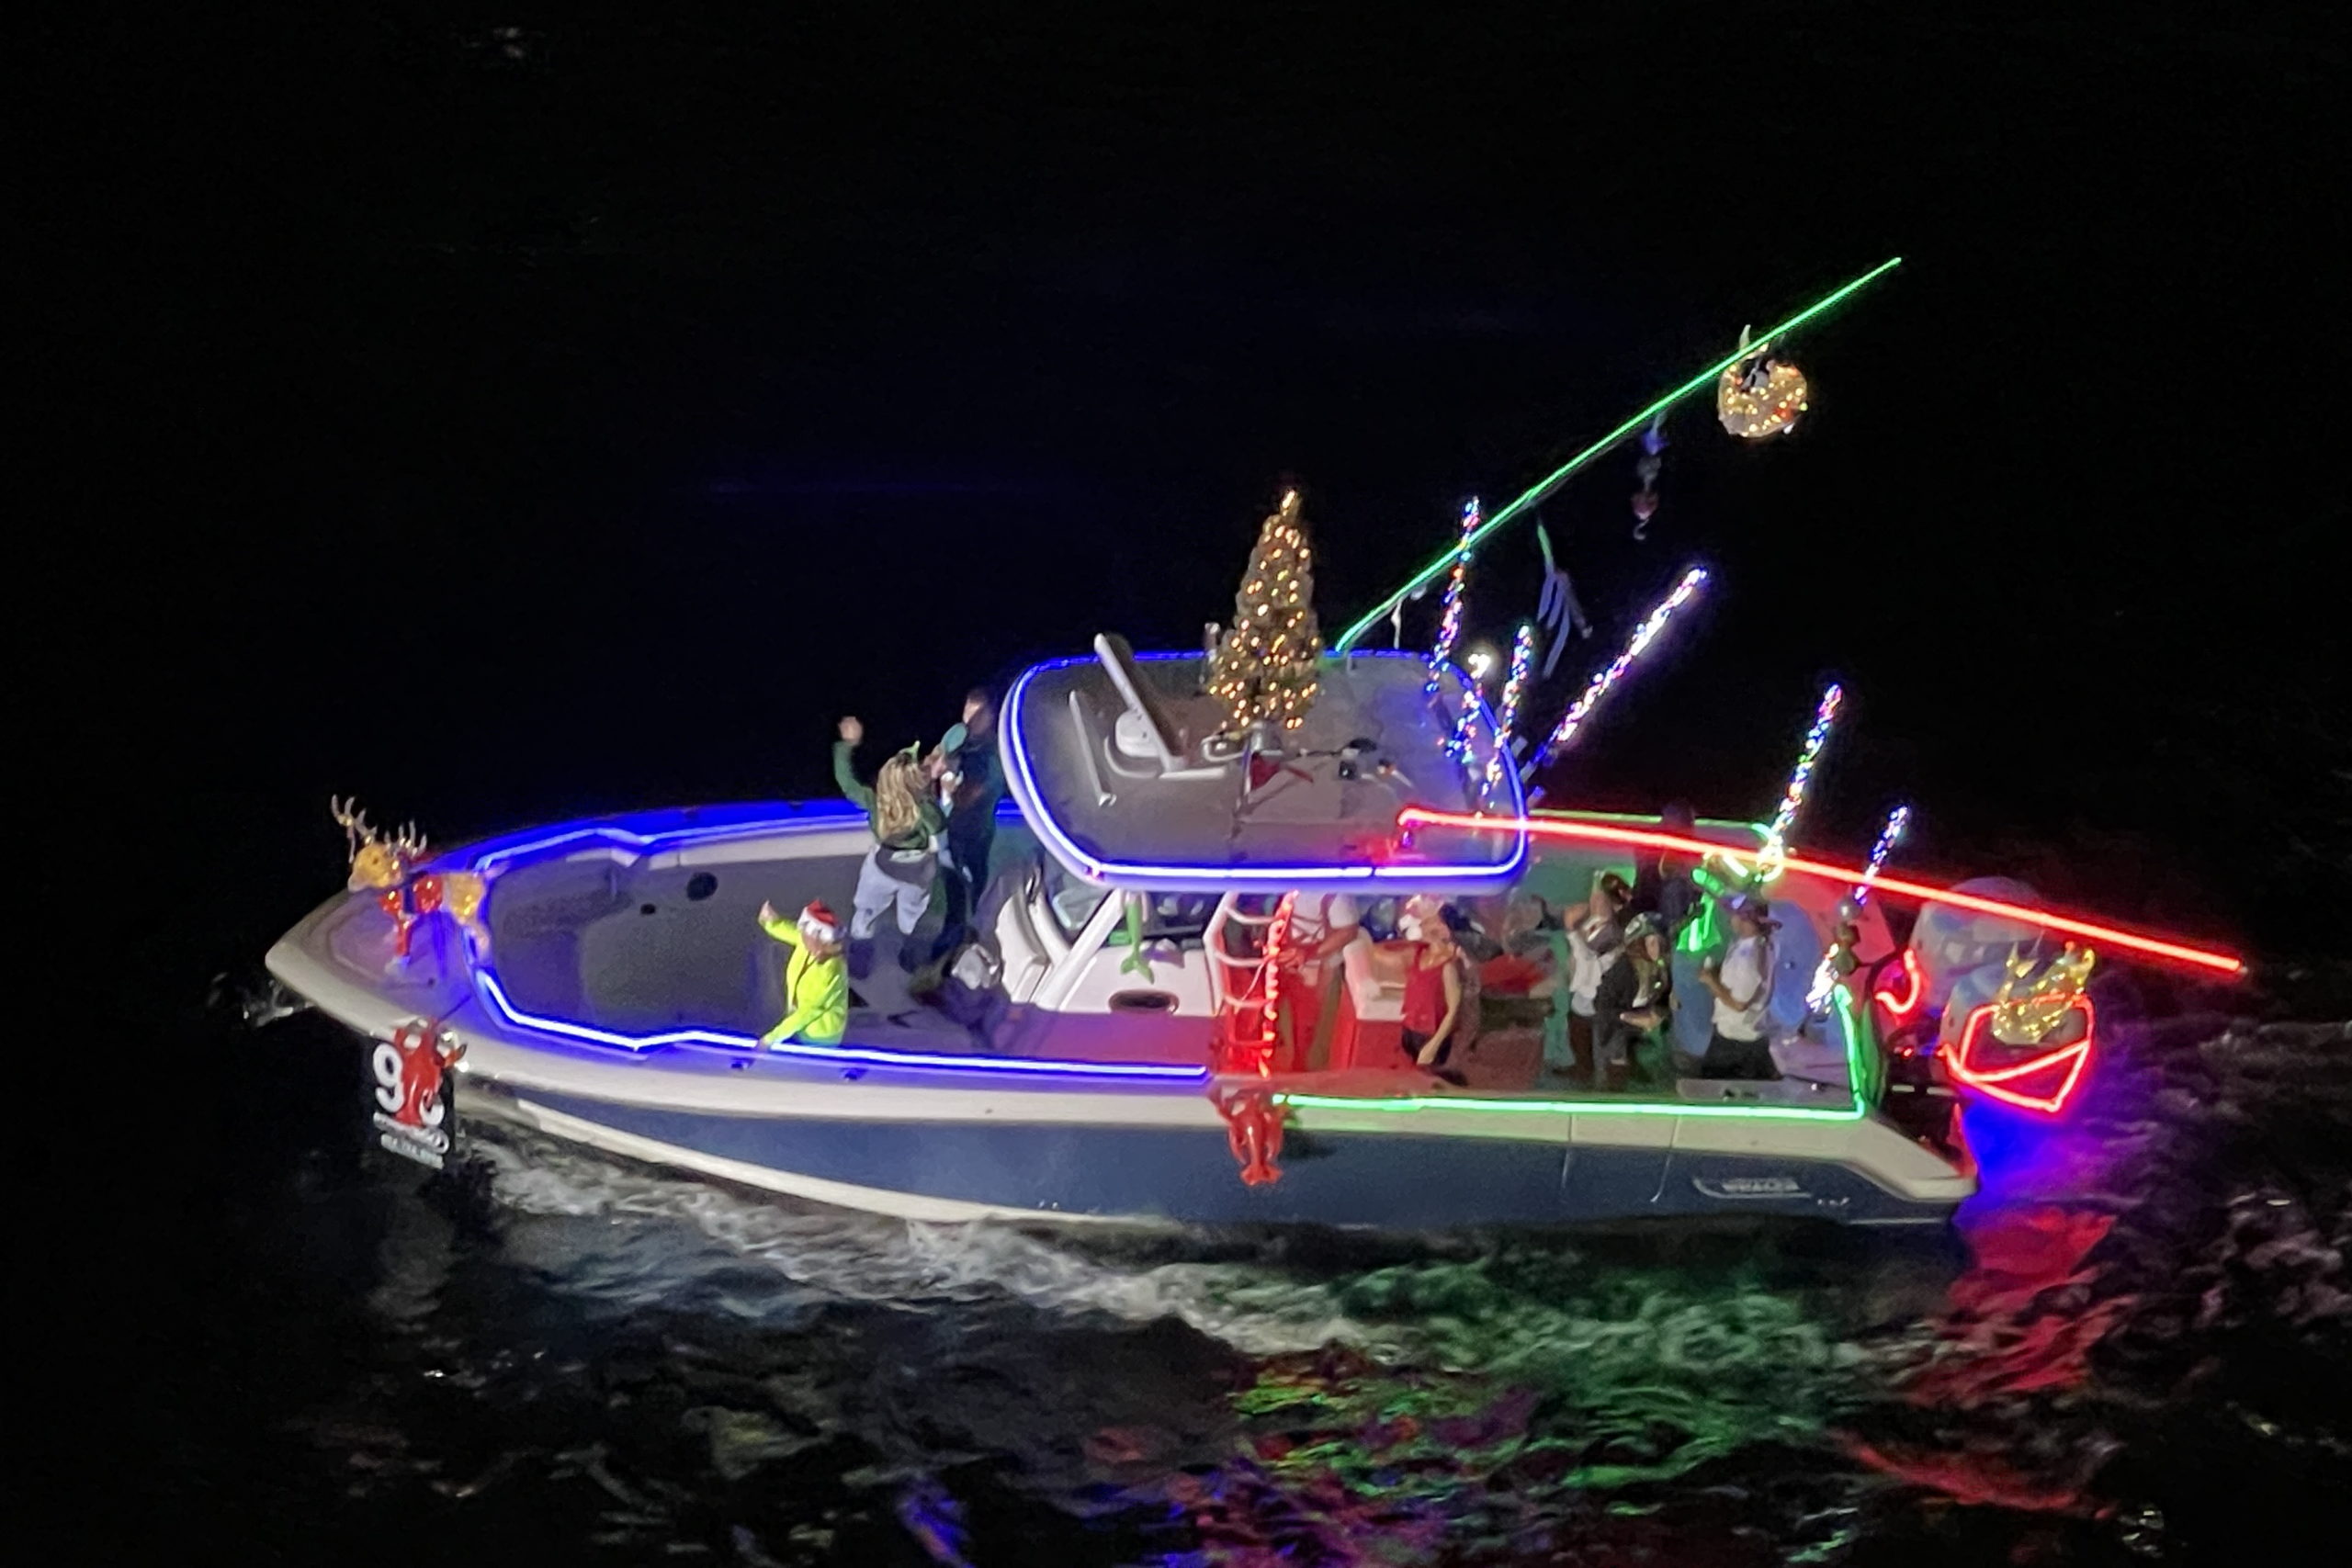 T/T Sea Clef, boat number 96 in the 2022 Winterfest Boat Parade